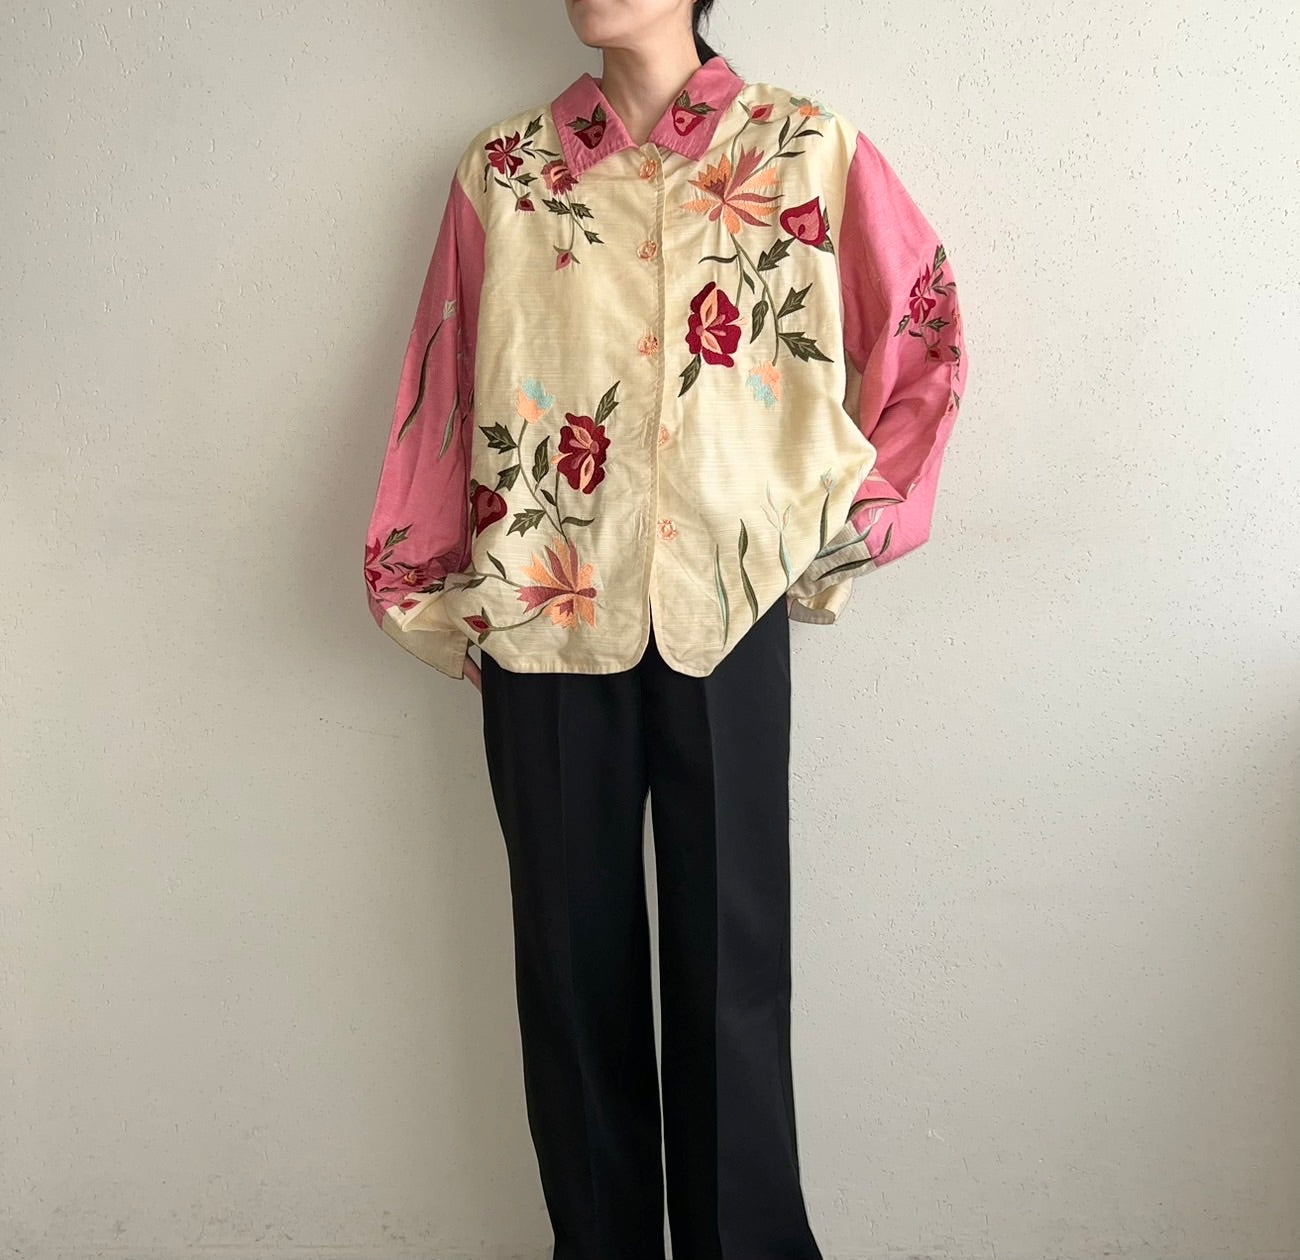 90s Embroidery Jacket